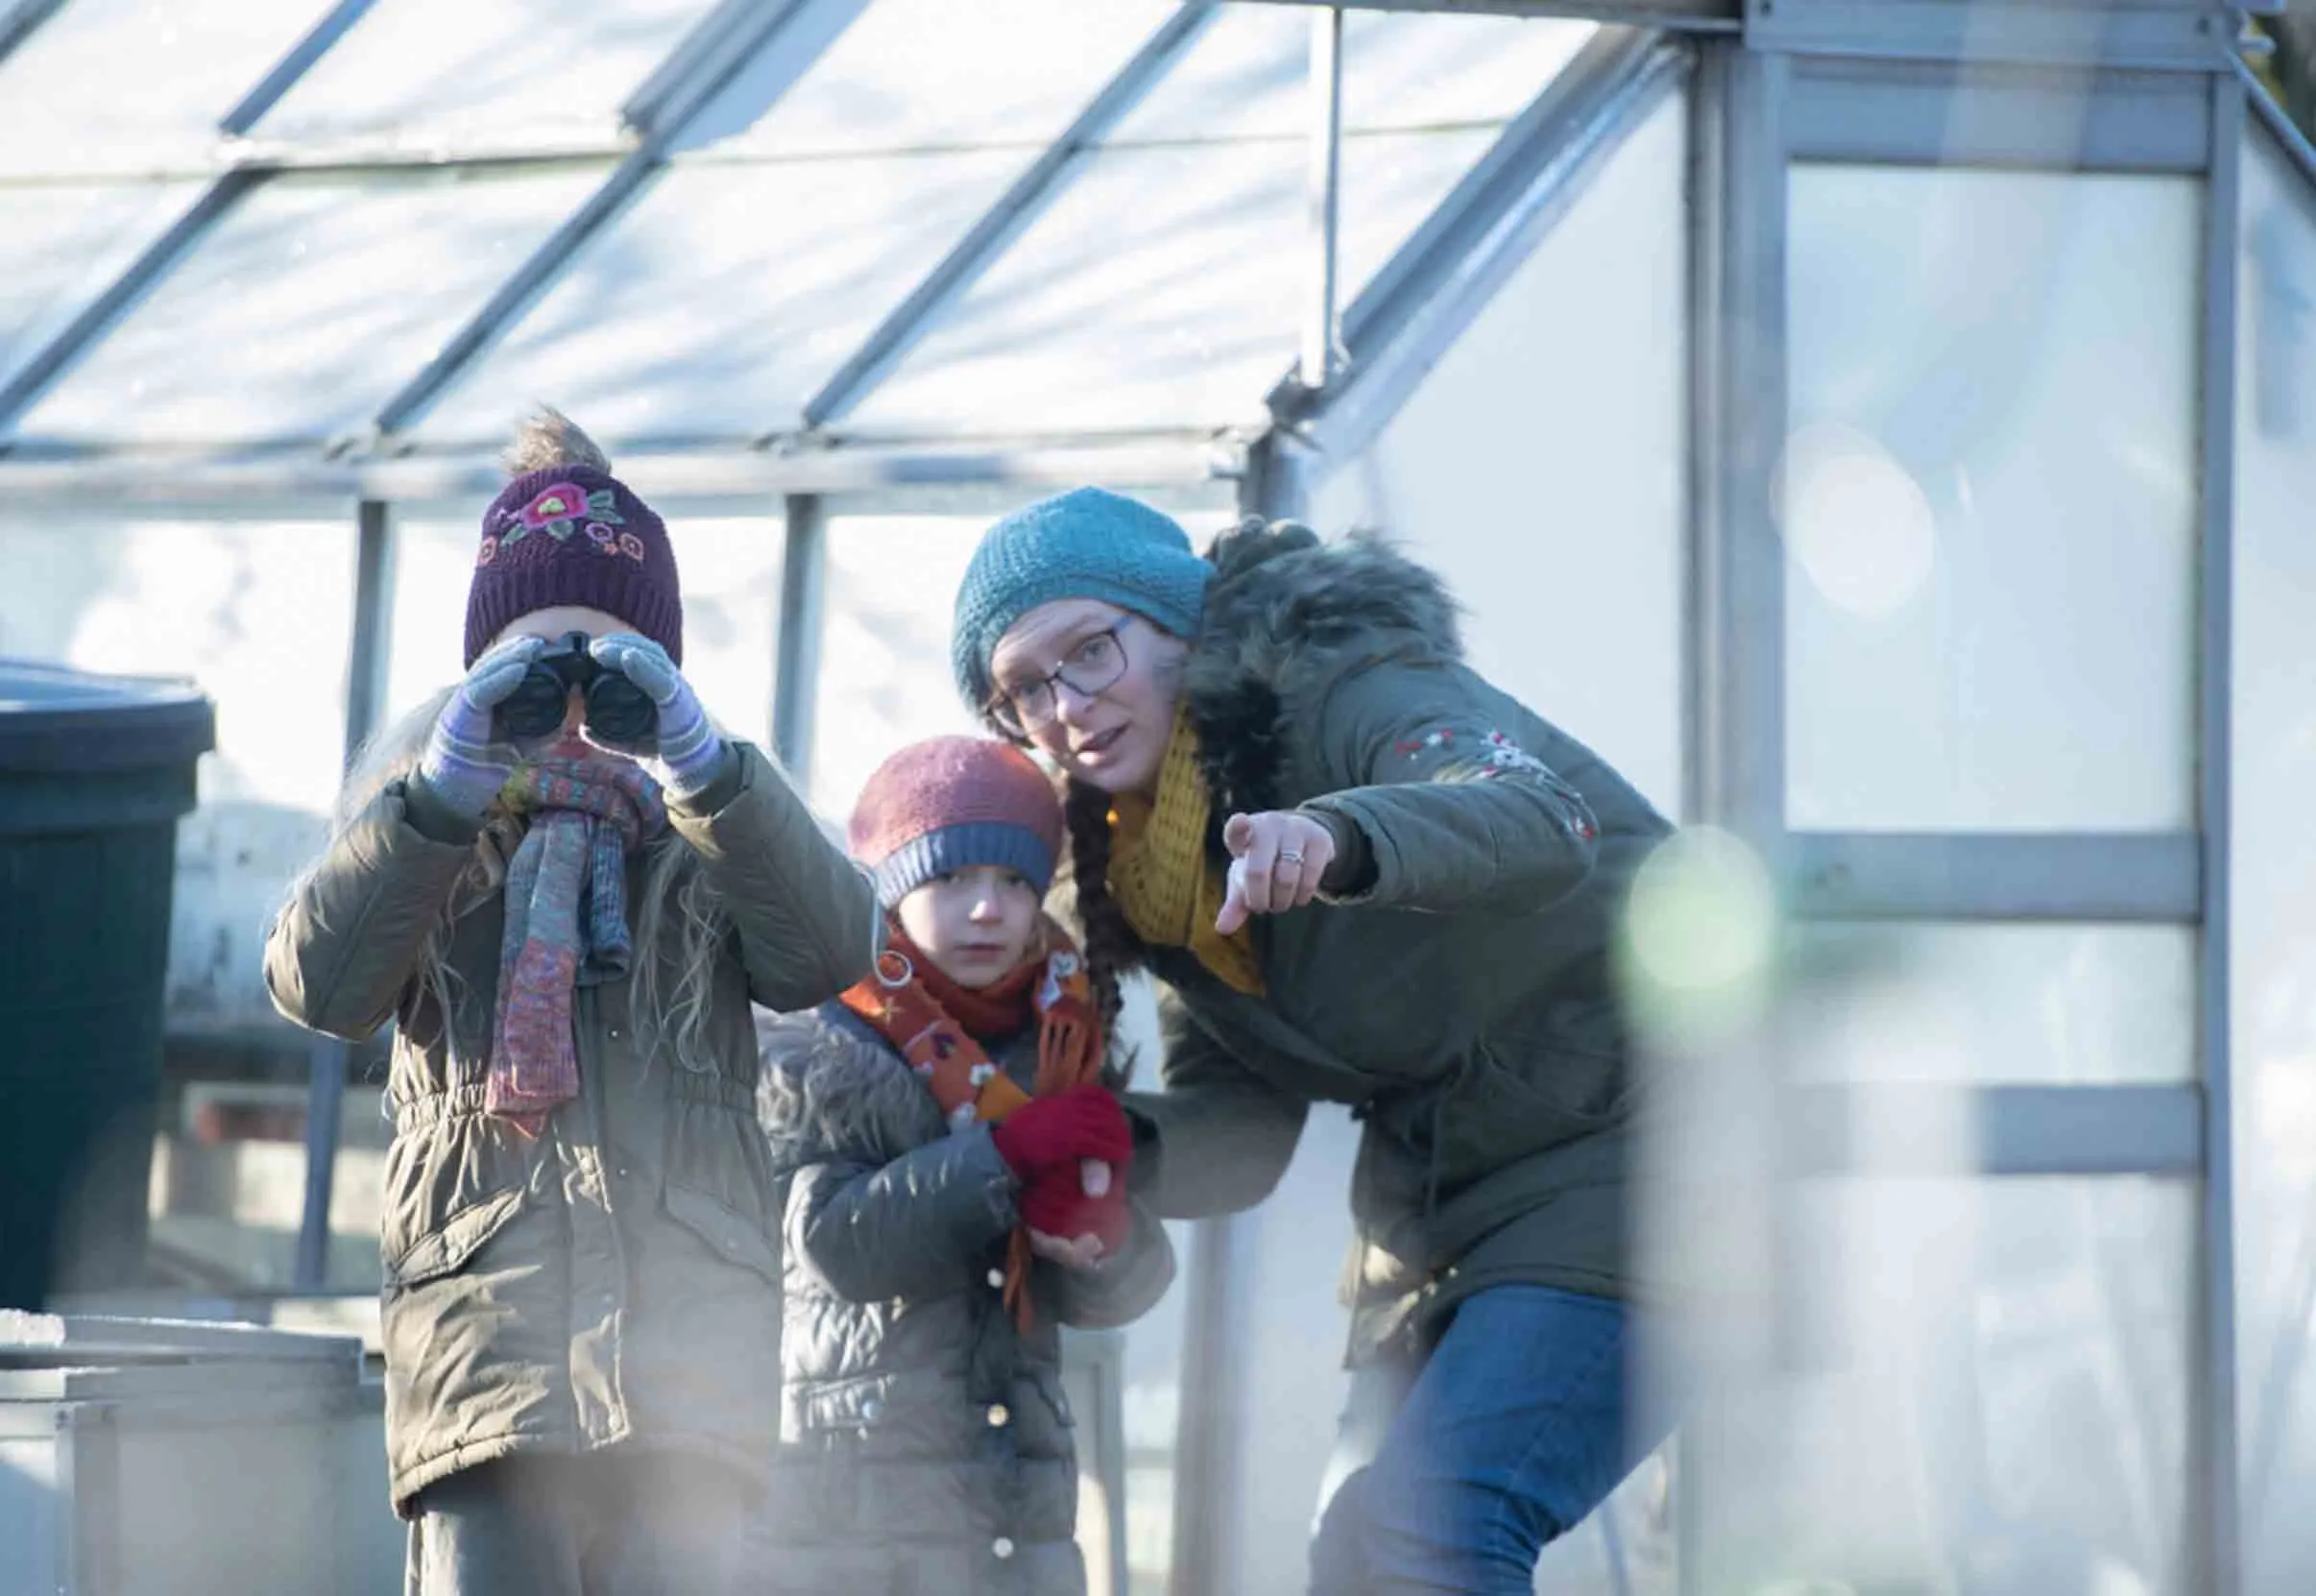 An adult and two children wearing warm winter clothing in front of a frosty greenhouse, one child is looking through binoculars and the other is looking to where the adult is pointing.